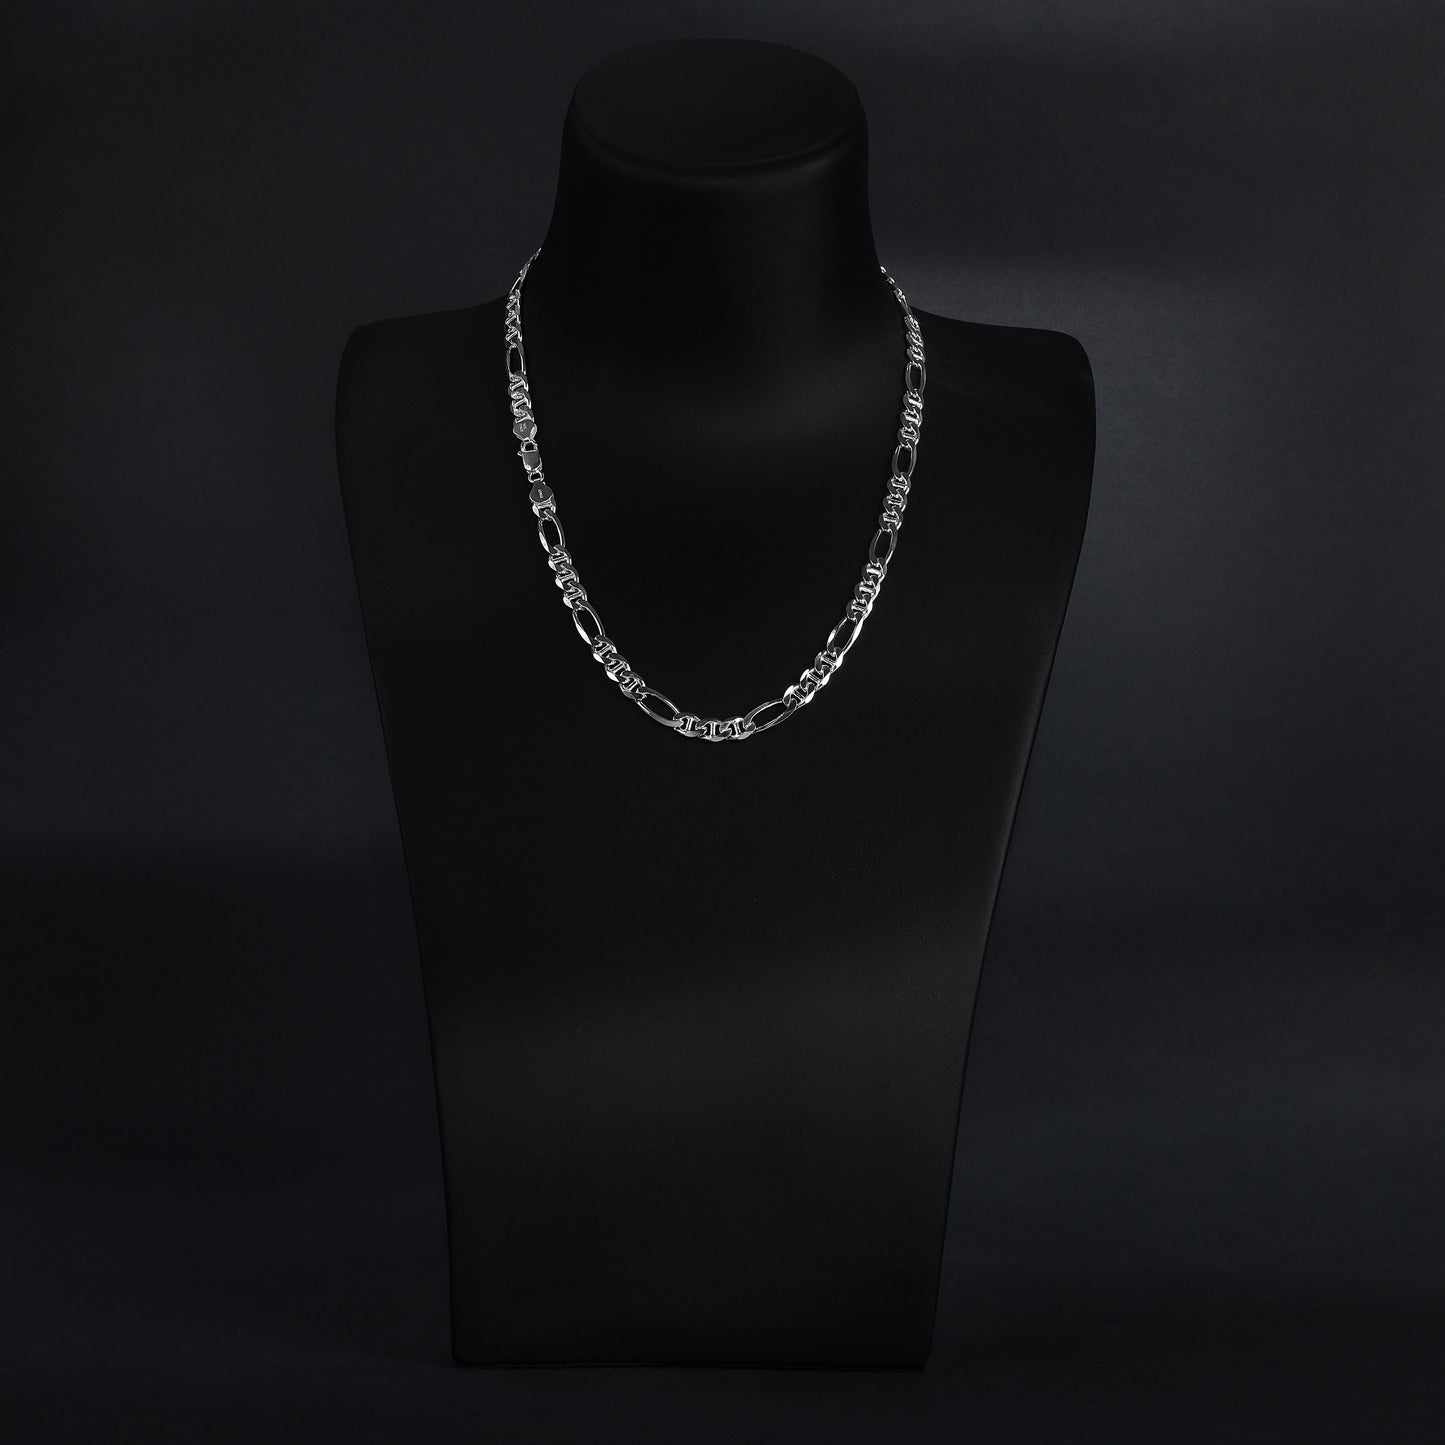 Figarucci Kette 7mm breit 55cm lang 925 Sterlingsilber Made in Italy (K607) - Taipan Schmuck